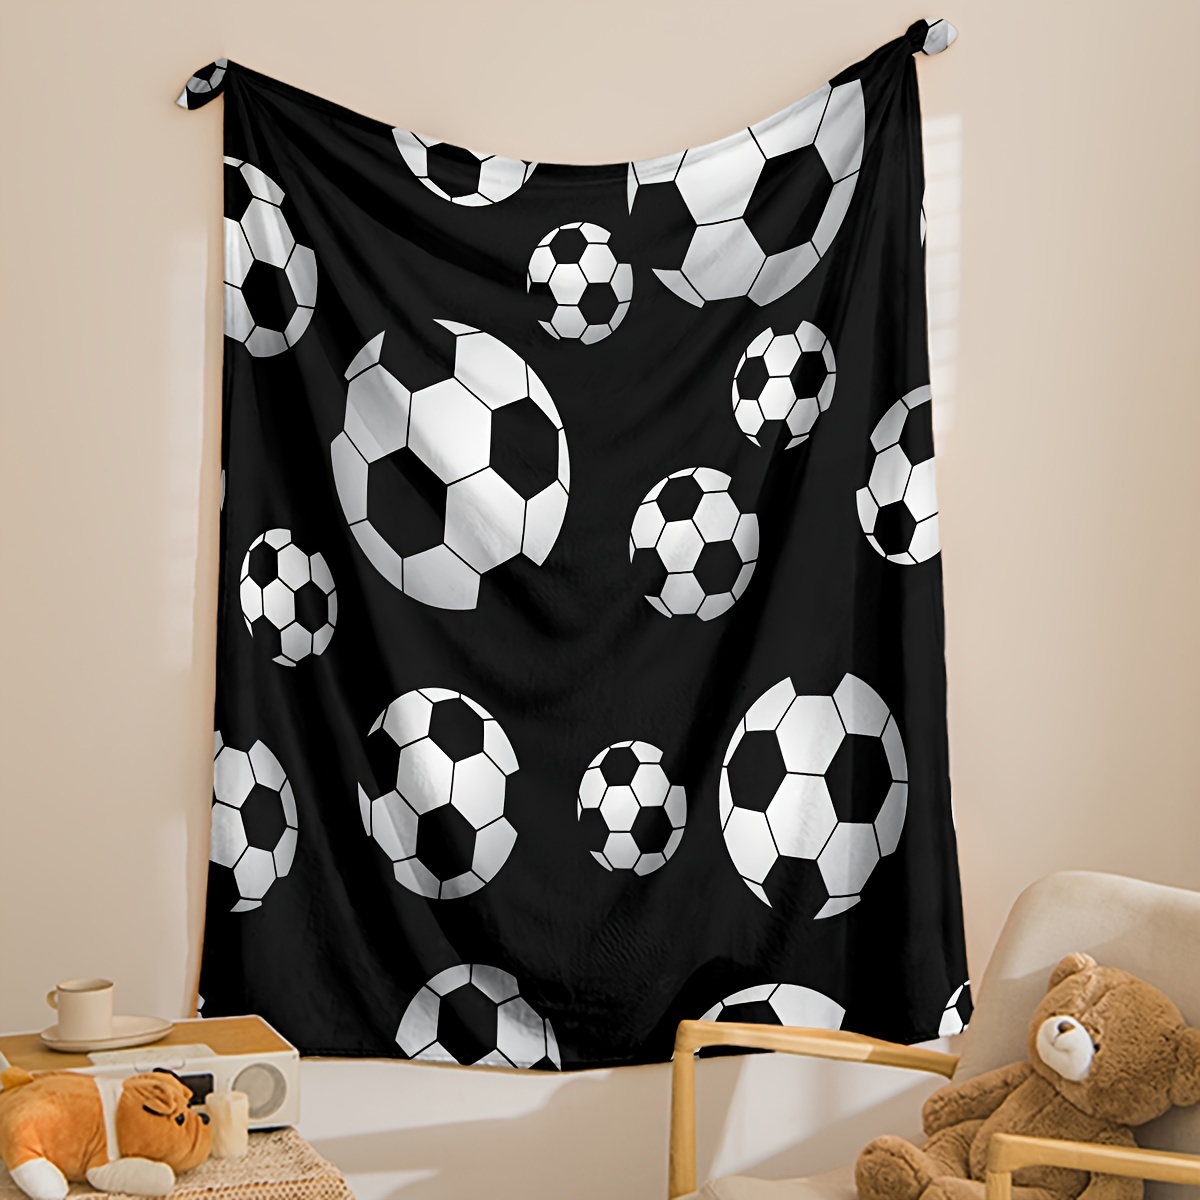 

1pc Sports Theme Football Print Blanket, Soft Warm Throw Blanket Nap Blanket For Couch Sofa Office Bed Office Camping Travelling